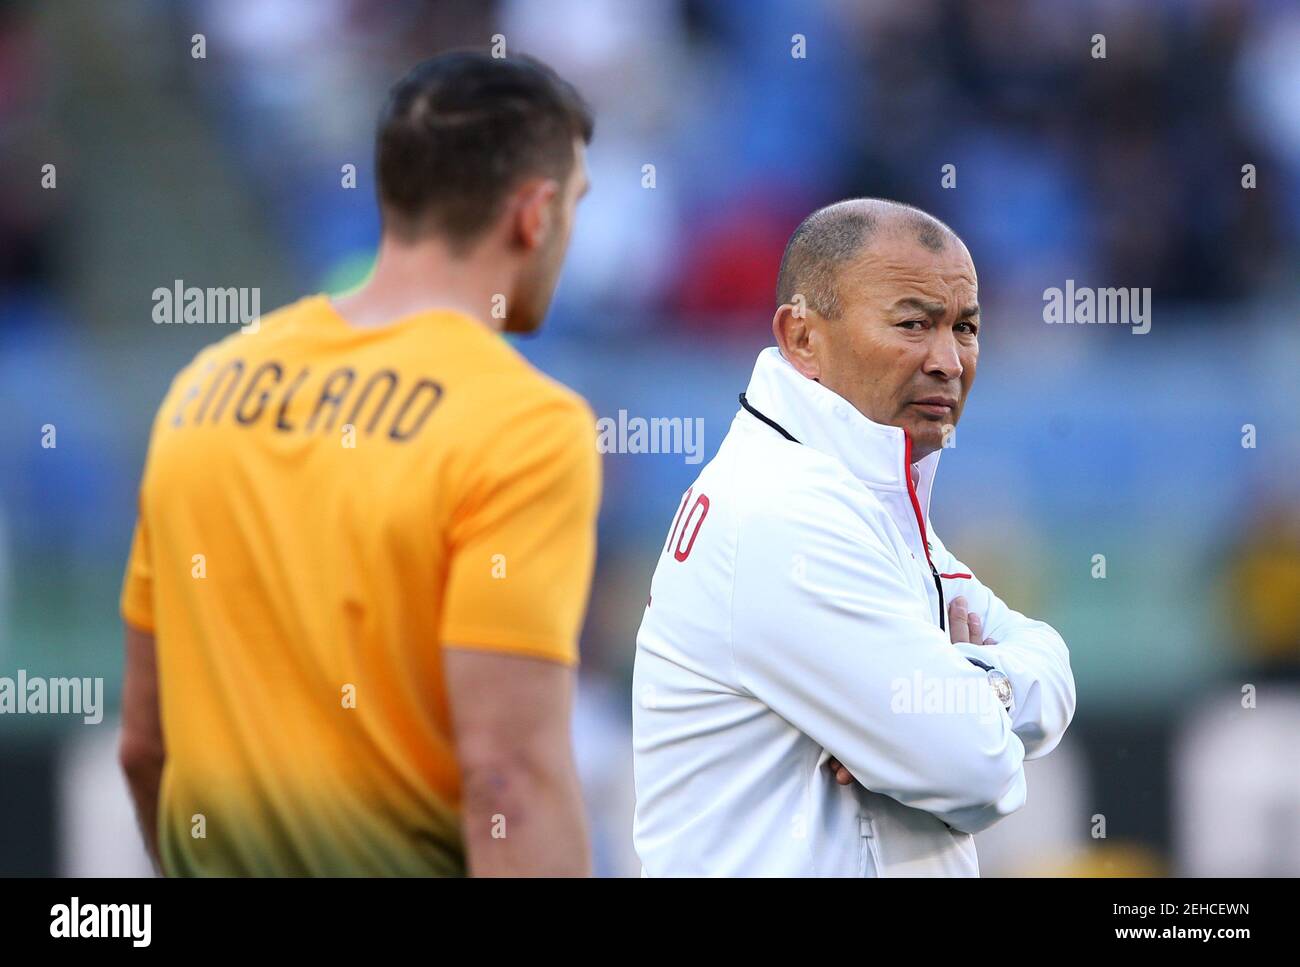 Rugby Union -  Six Nations Championship - Italy vs England - Stadio Olimpico, Rome, Italy - February 4, 2018   England head coach Eddie Jones during the warm up before the match     REUTERS/Alessandro Bianchi Stock Photo